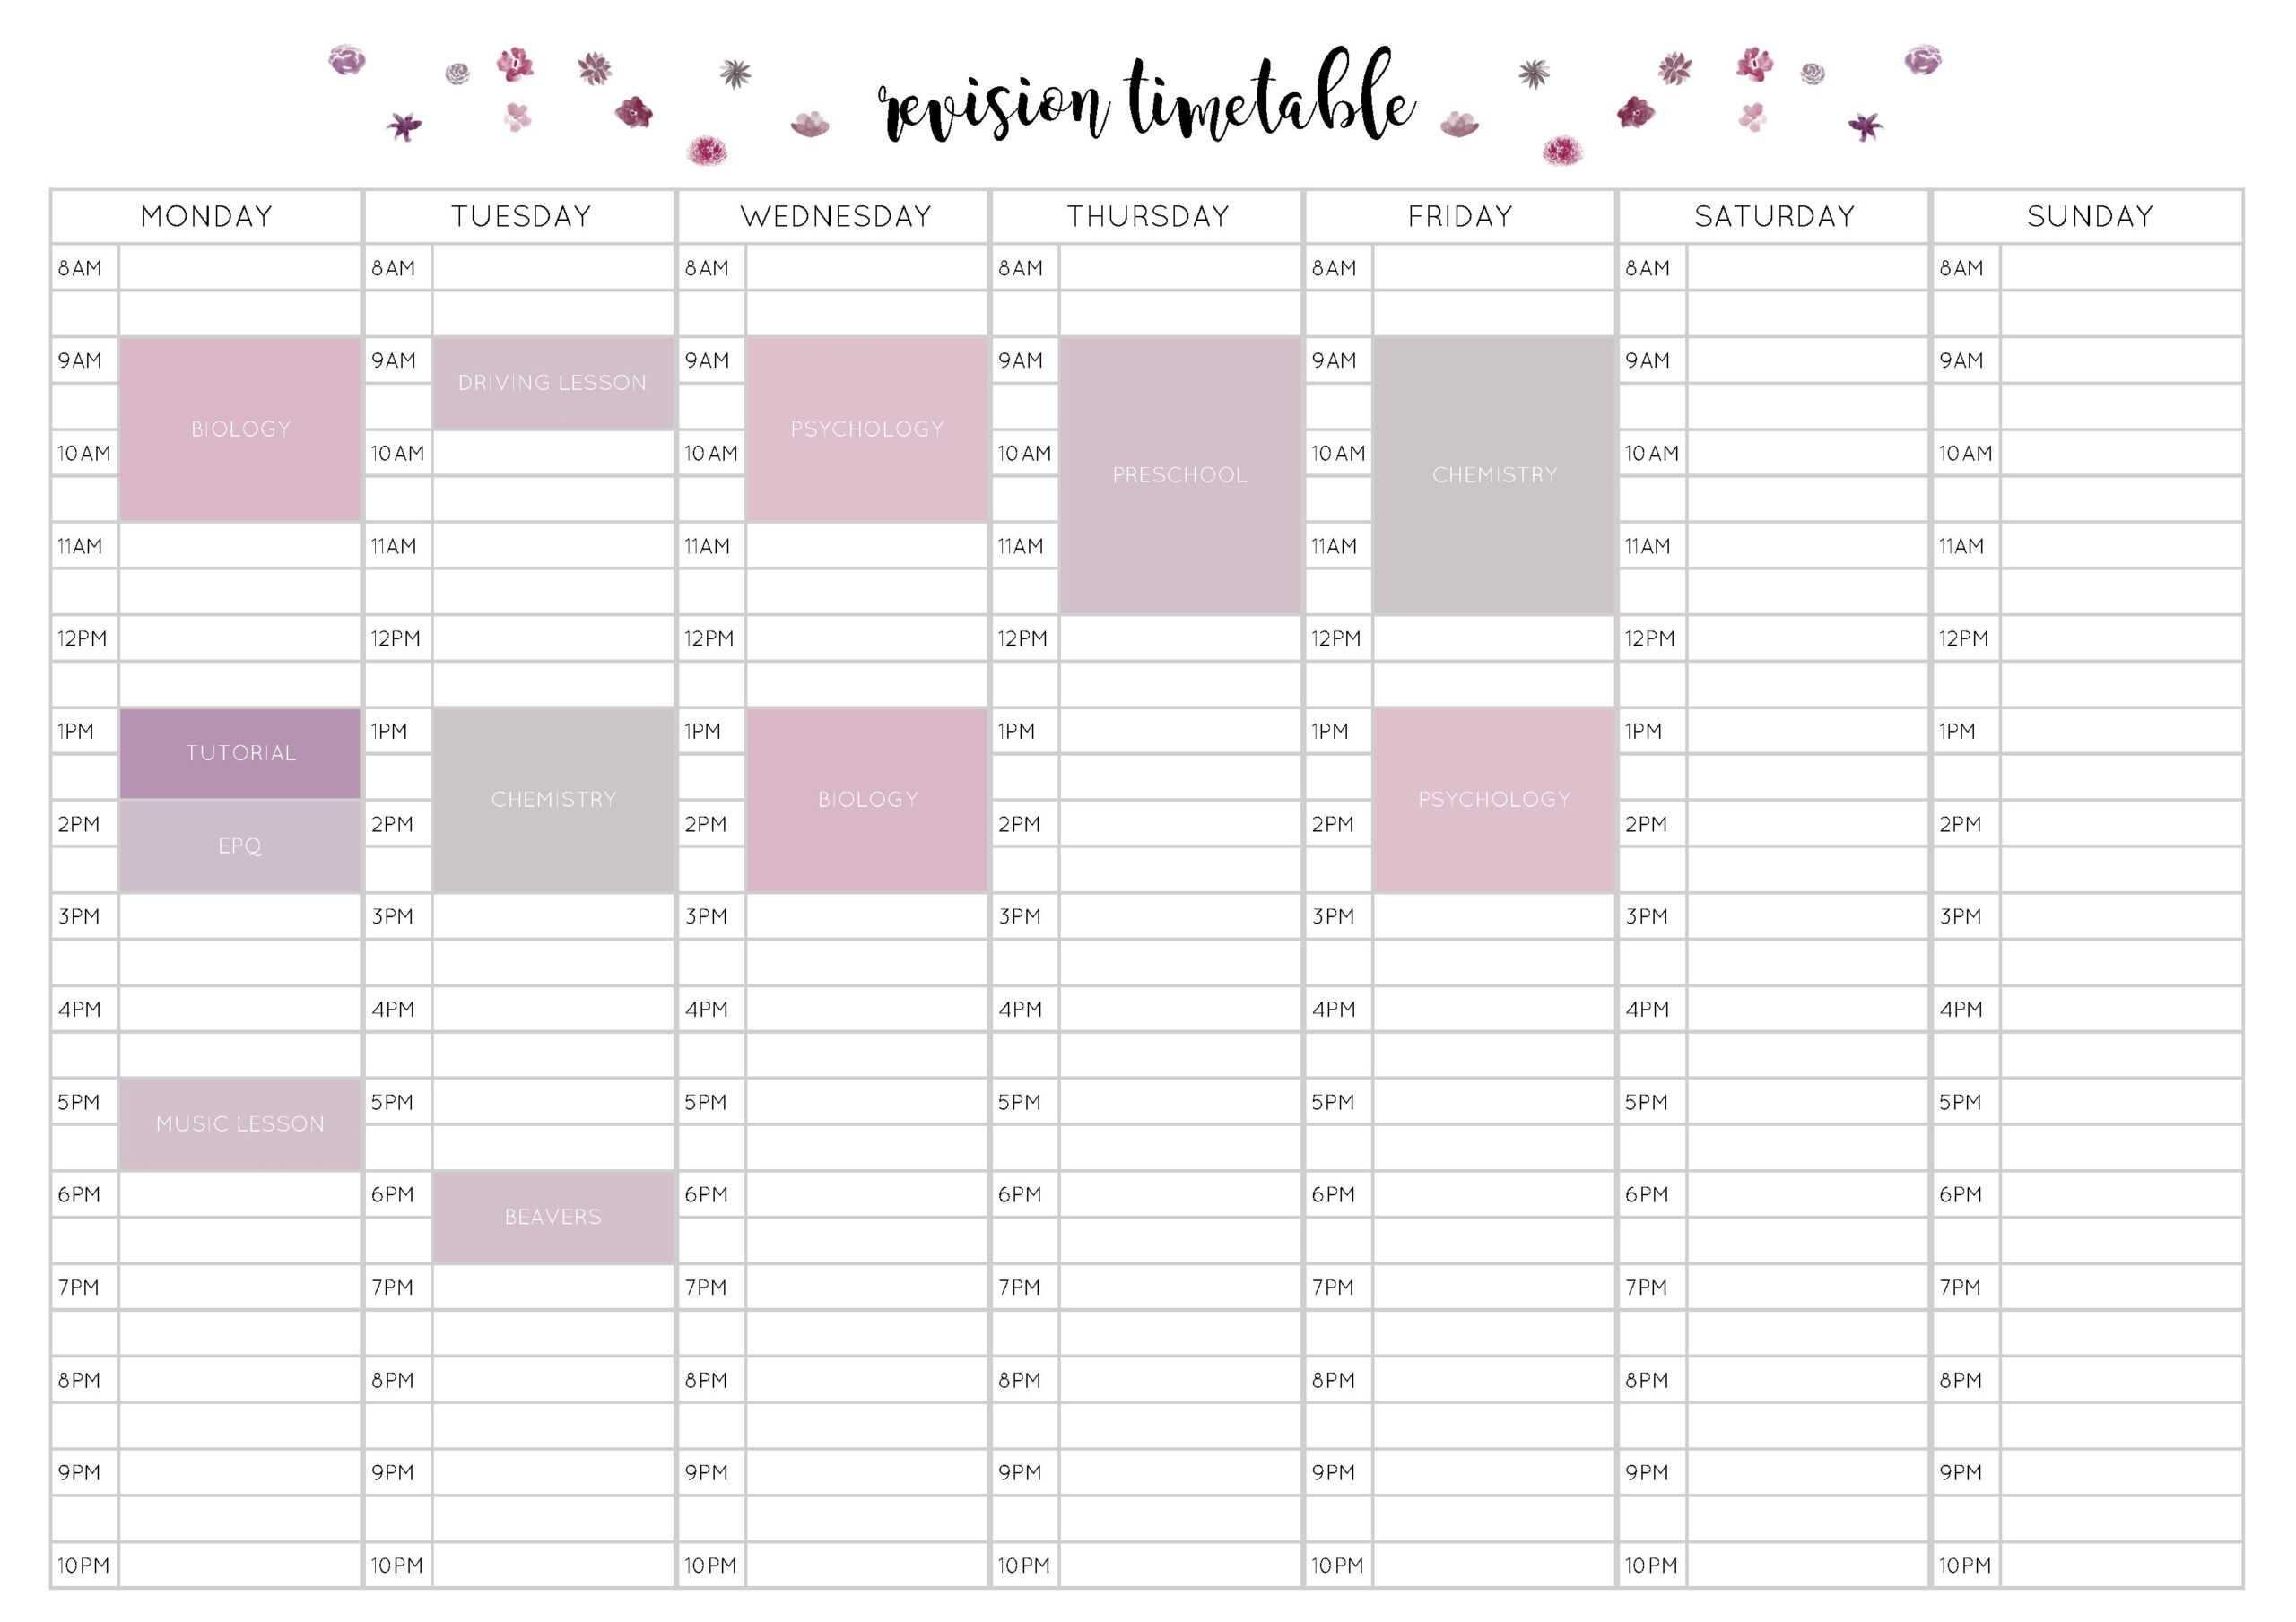 Free Revision Timetable Printable – Emily Studies Within Blank Revision Timetable Template